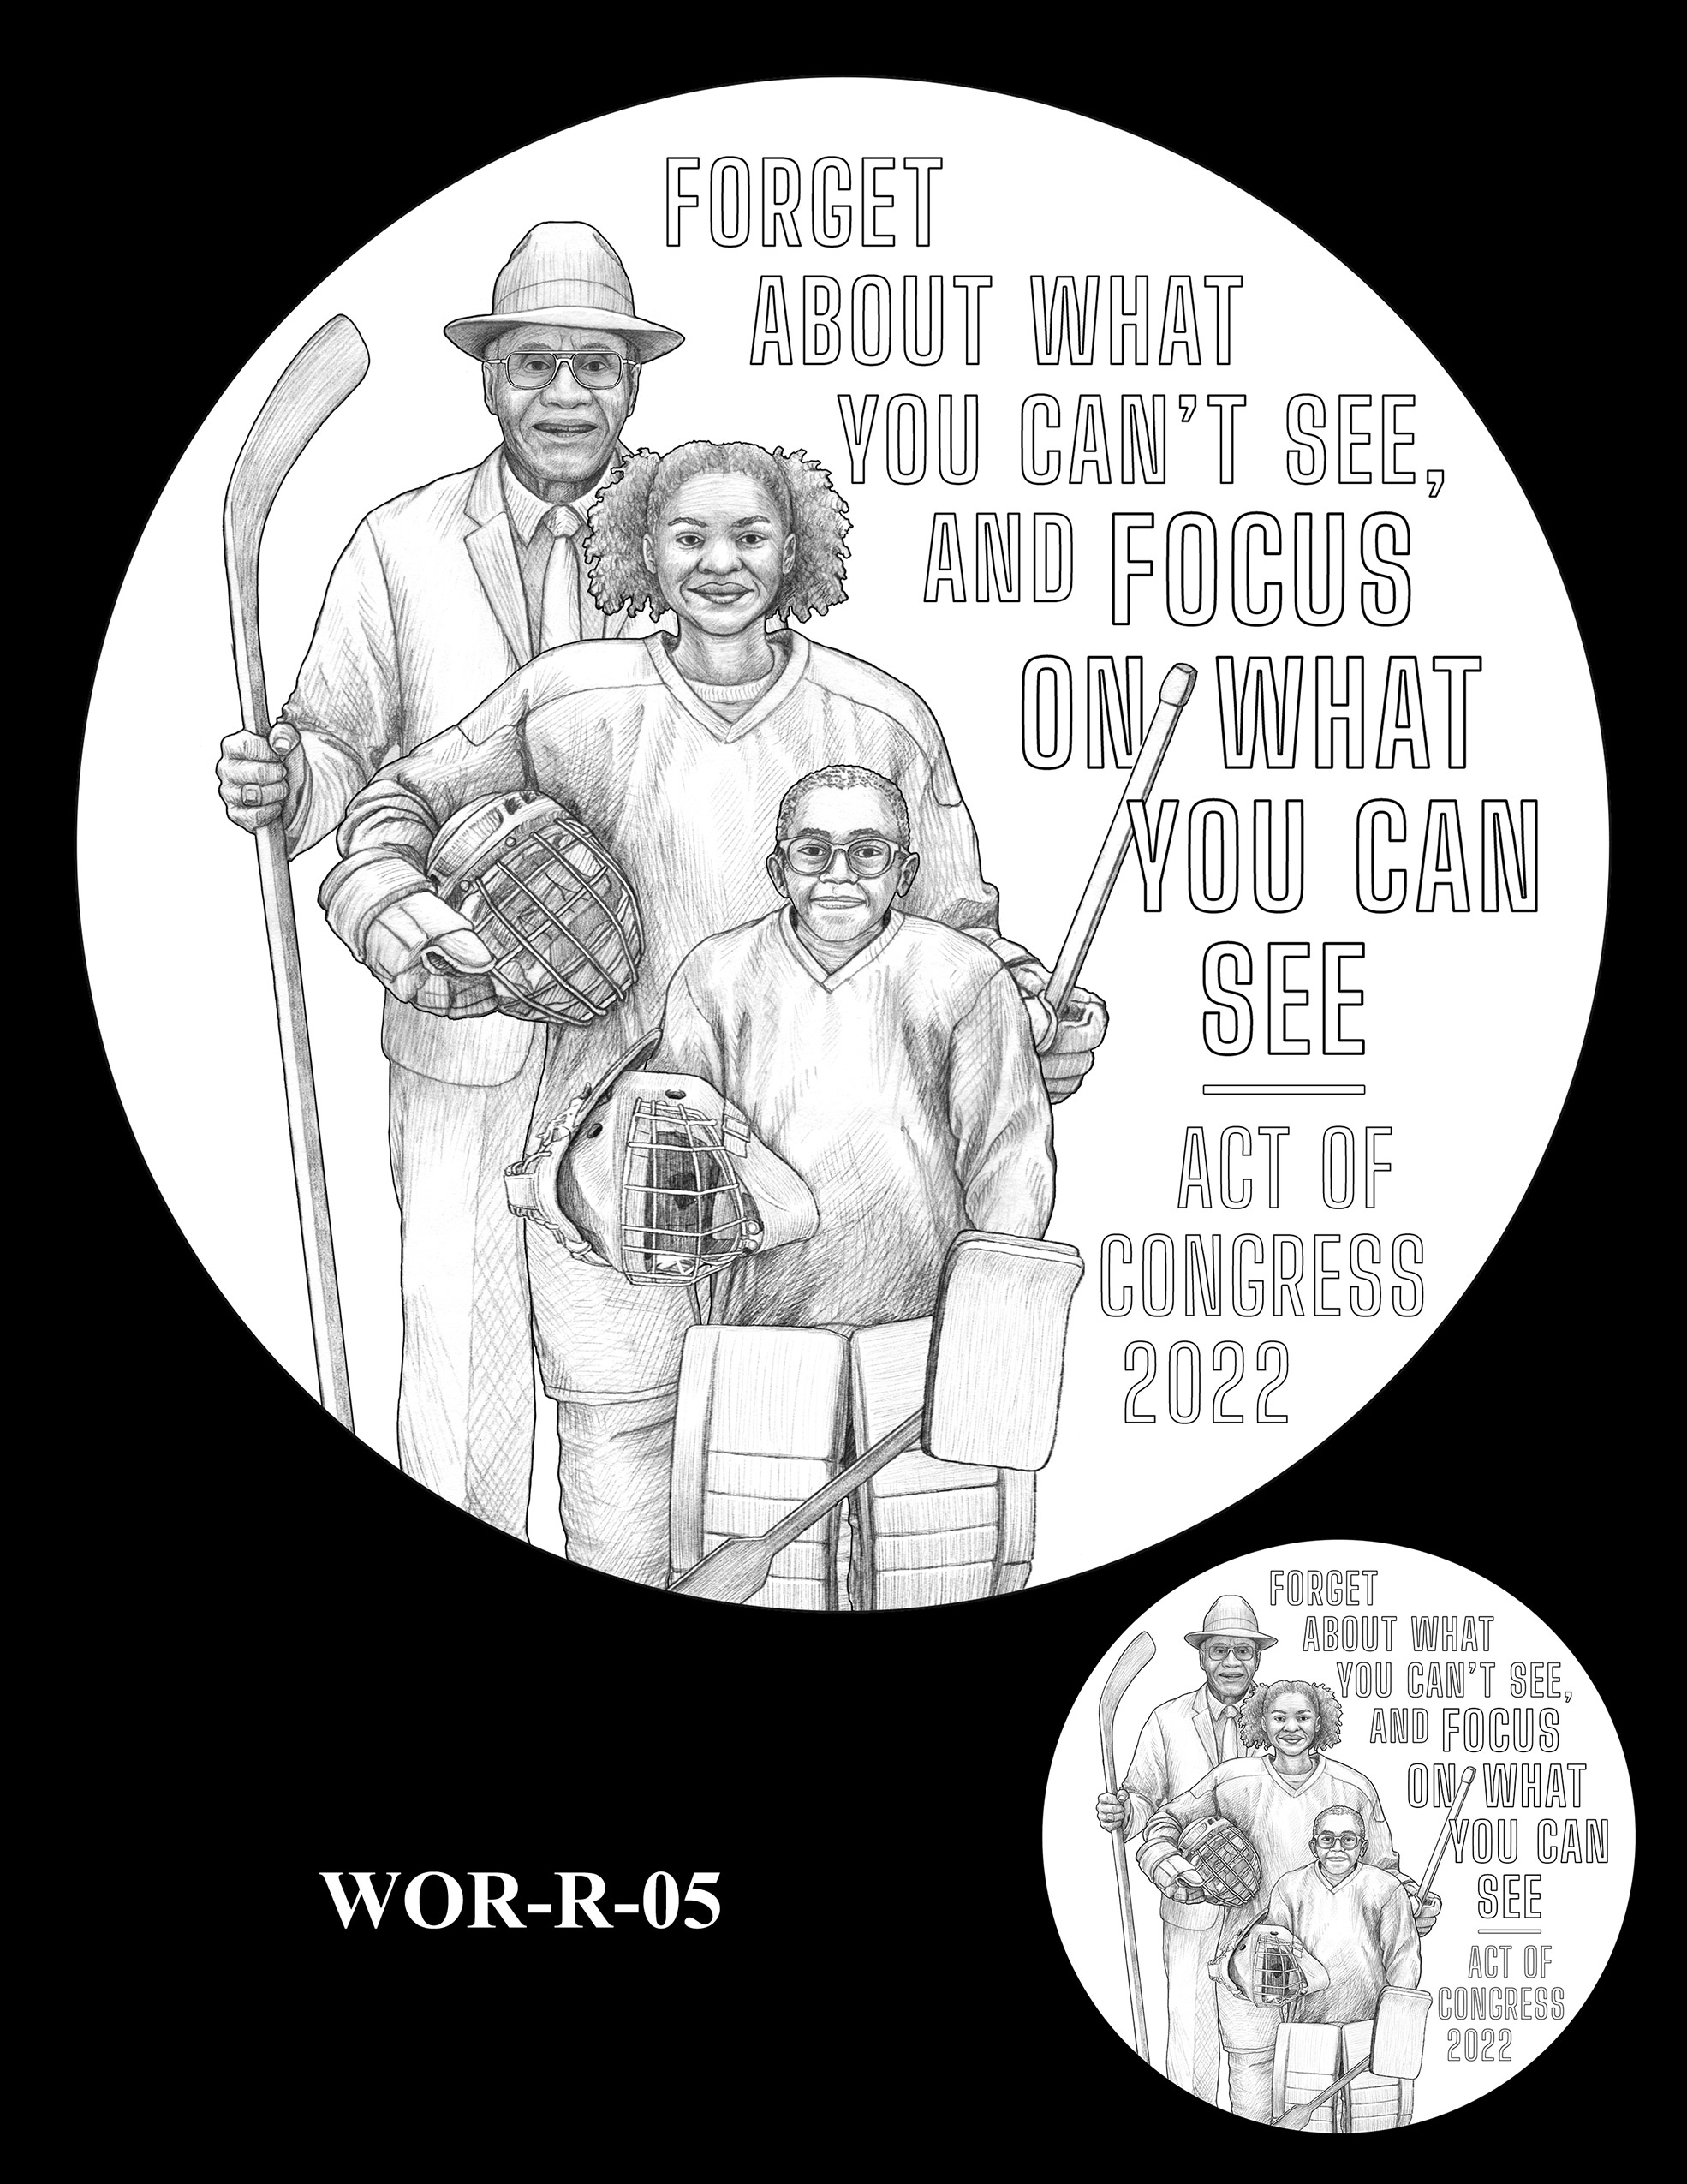 WOR-R-05 -- Willie O'Ree Congressional Gold Medal